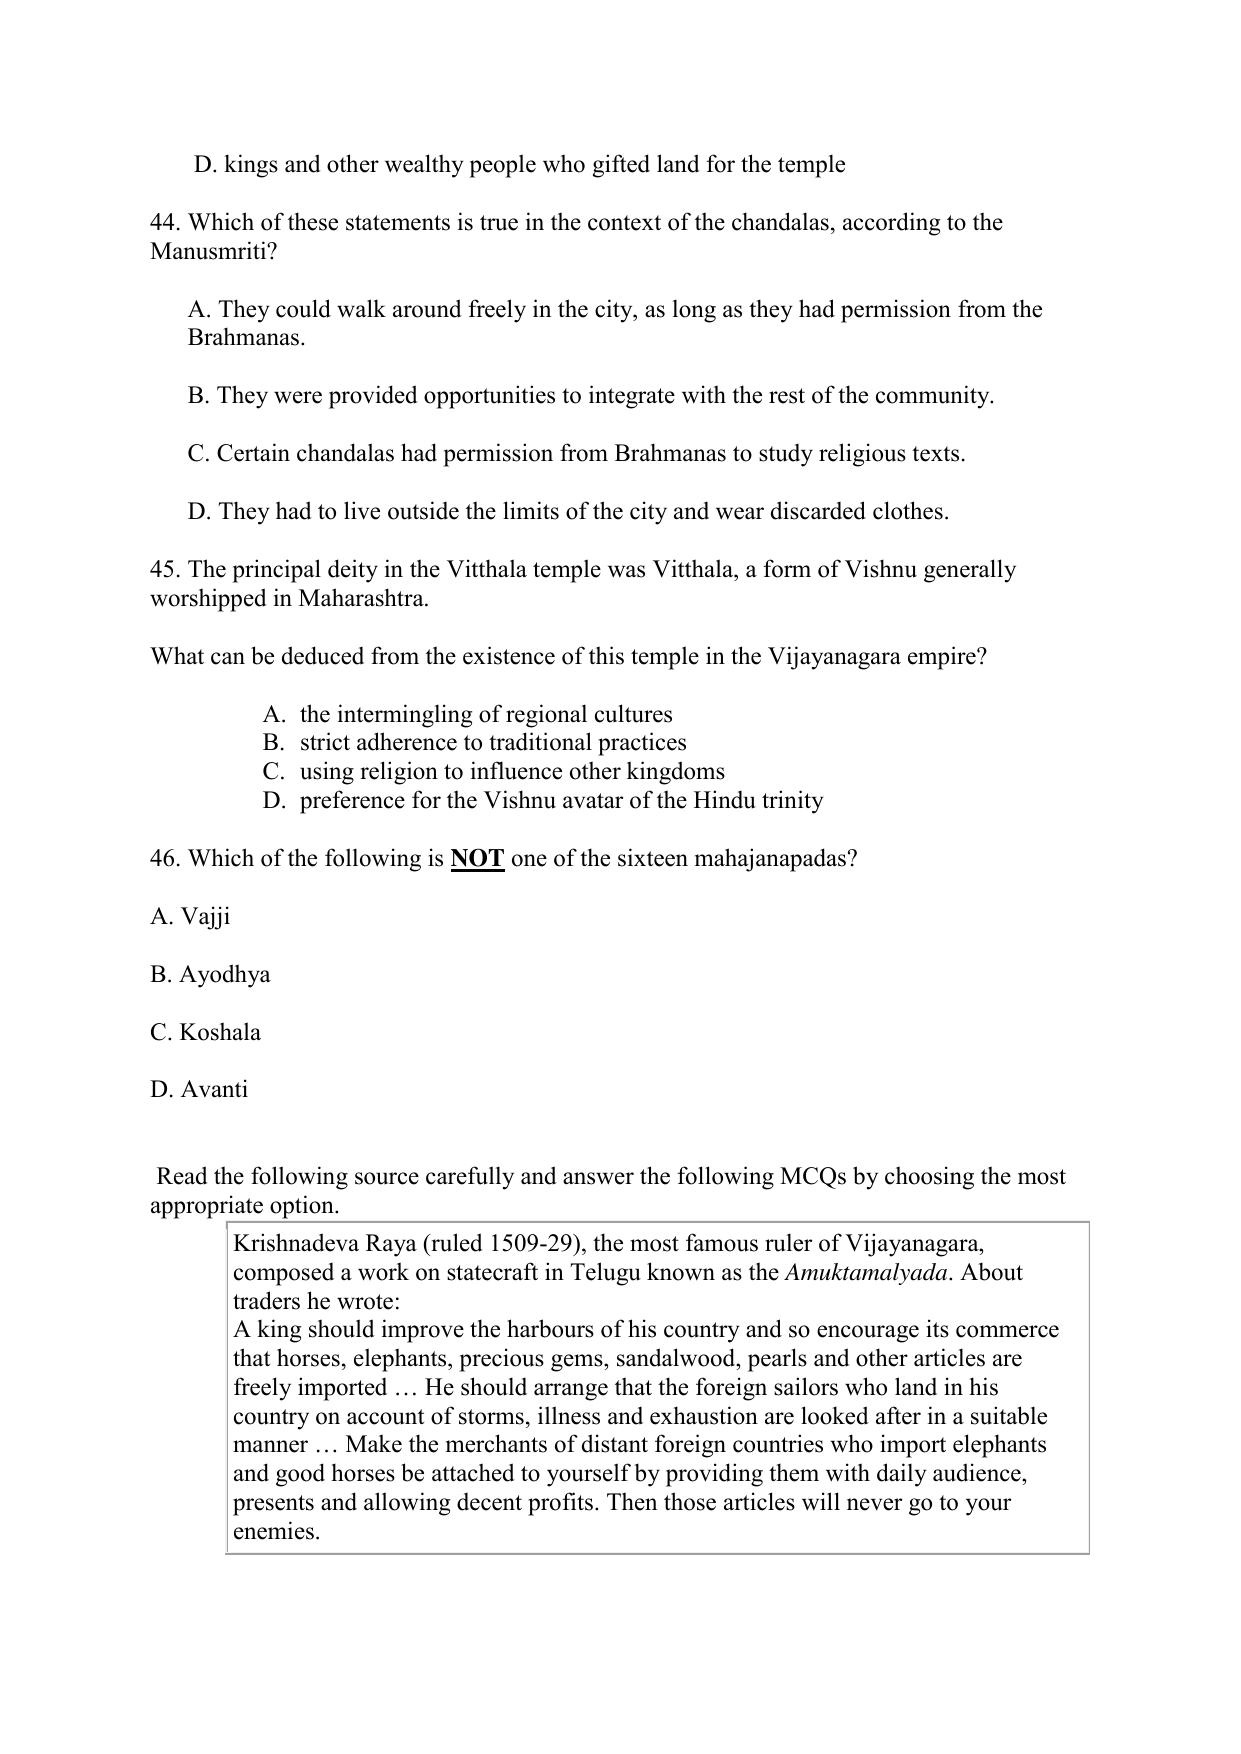 CBSE Class 12 History Term 1 Practice Questions 2021-22 - Page 9